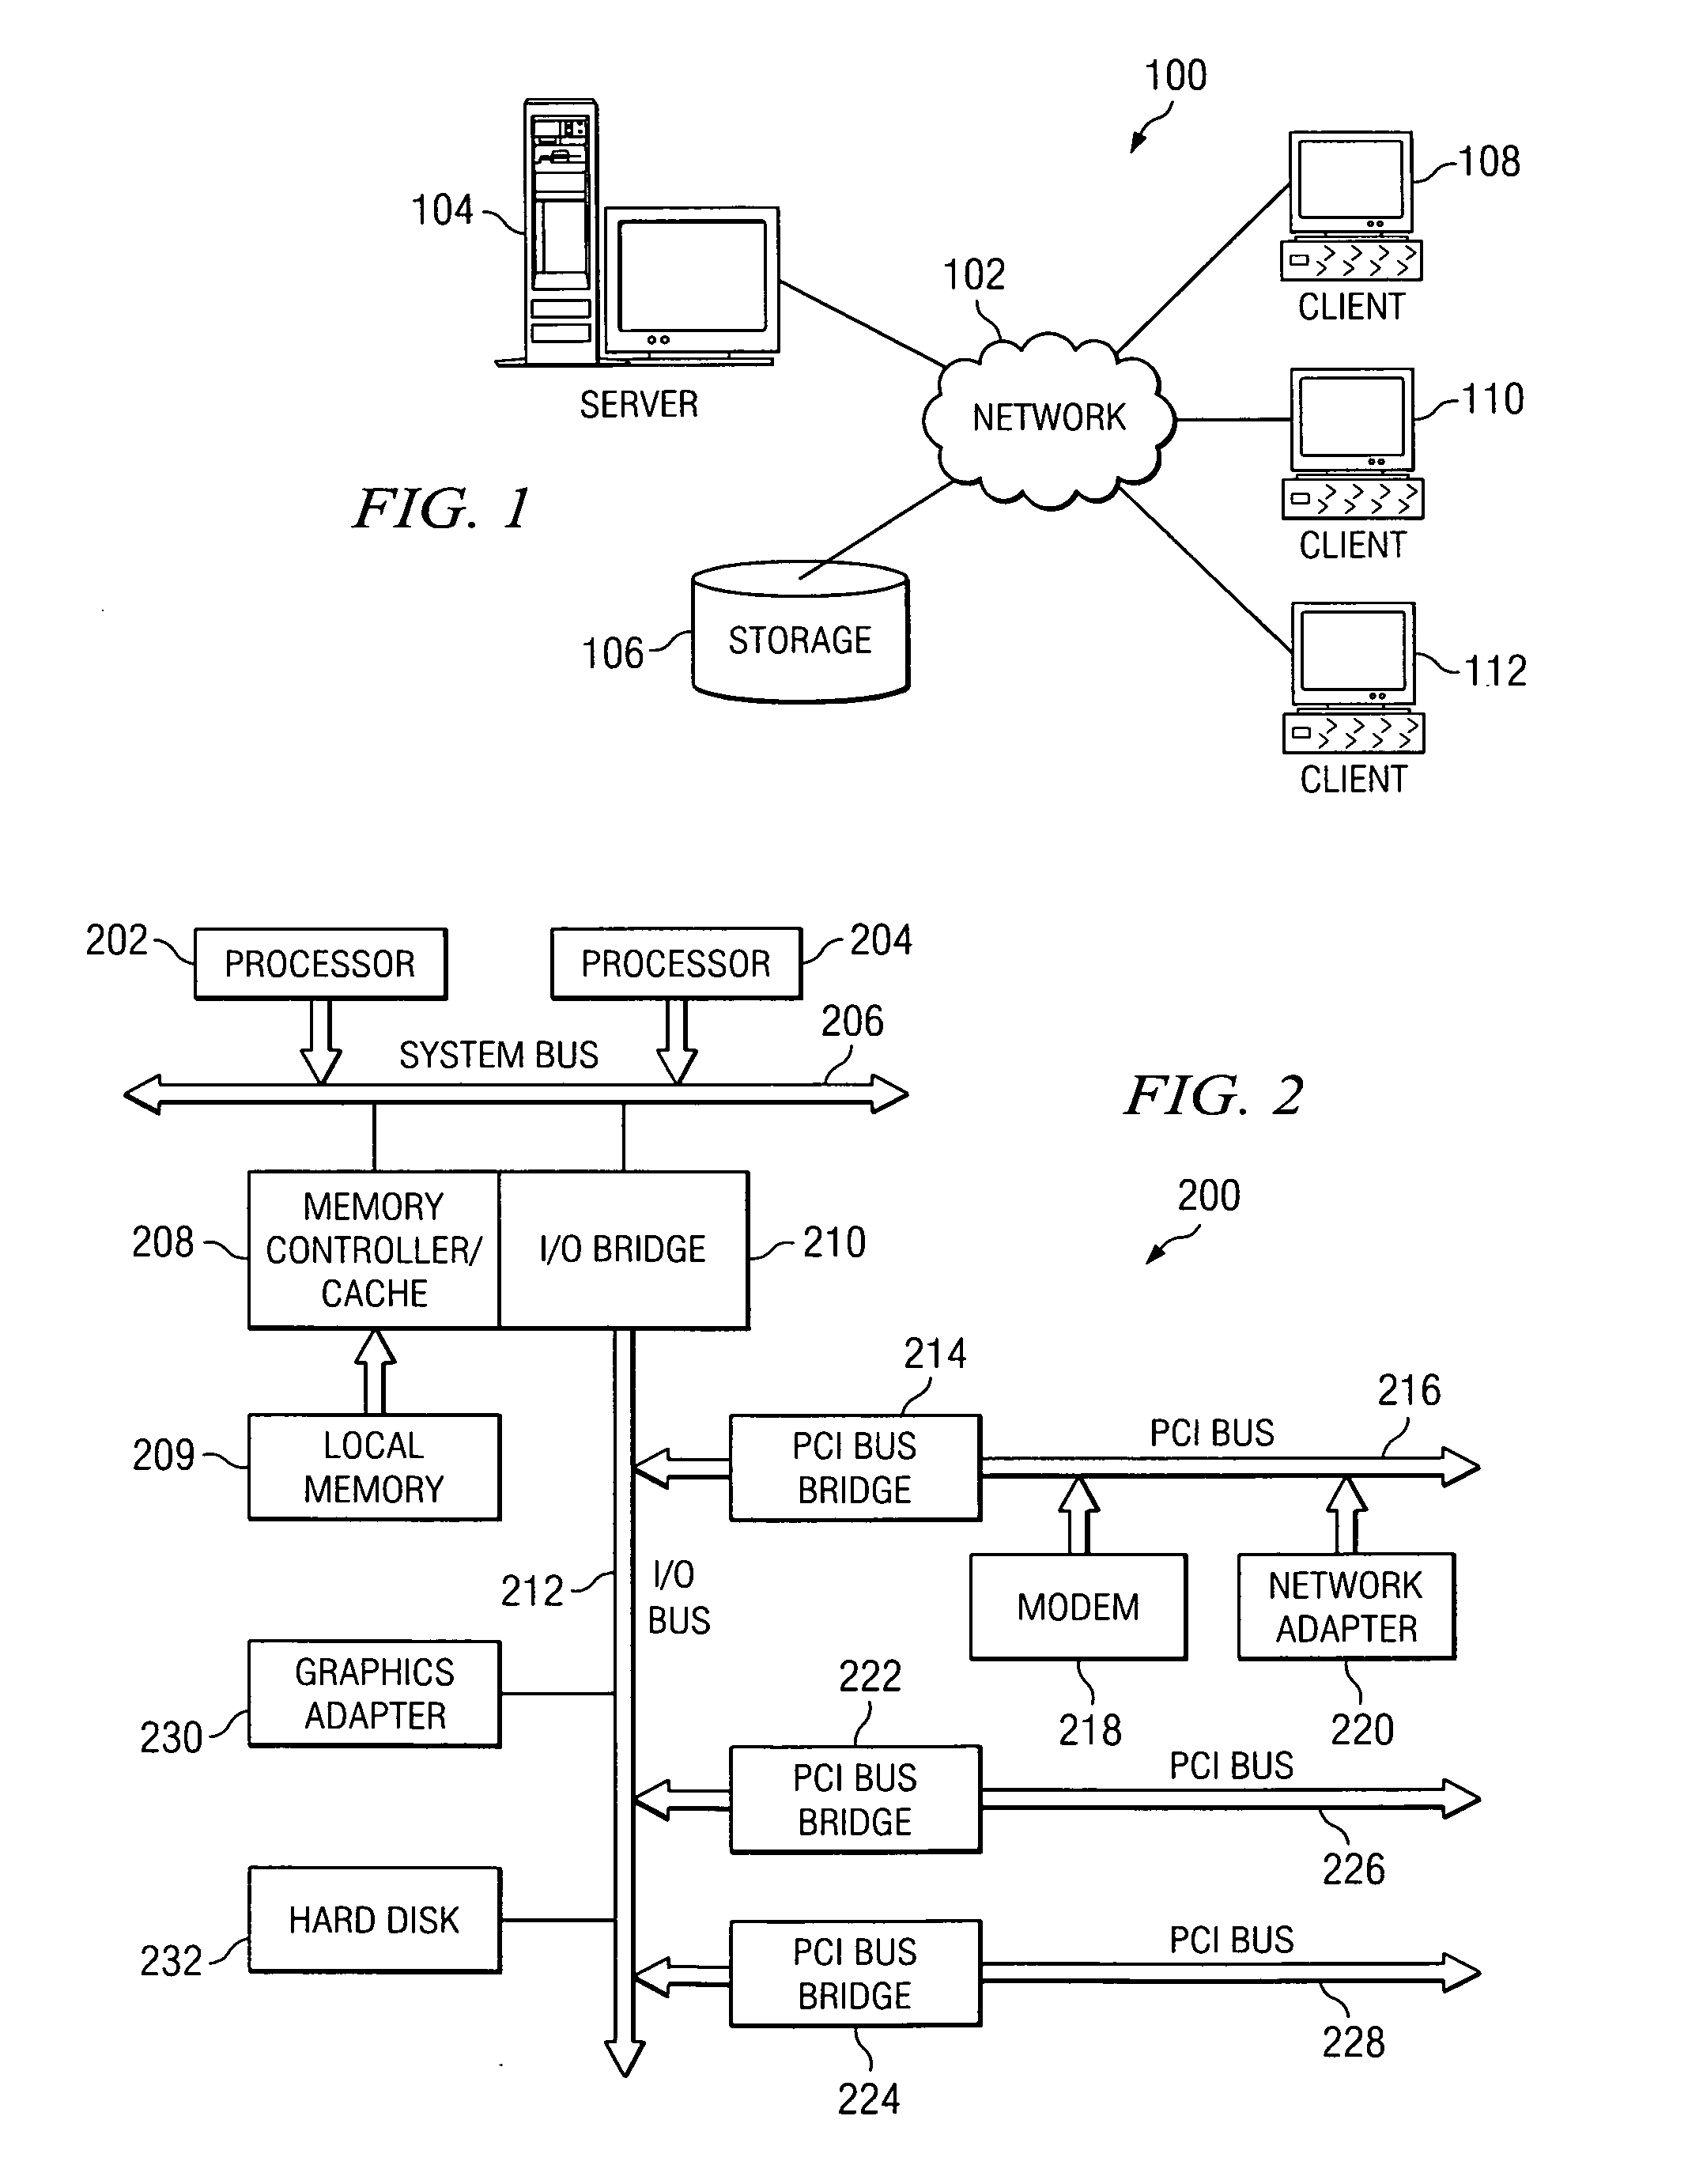 Method and apparatus for defining and instrumenting reusable Java server page code snippets for website testing and production